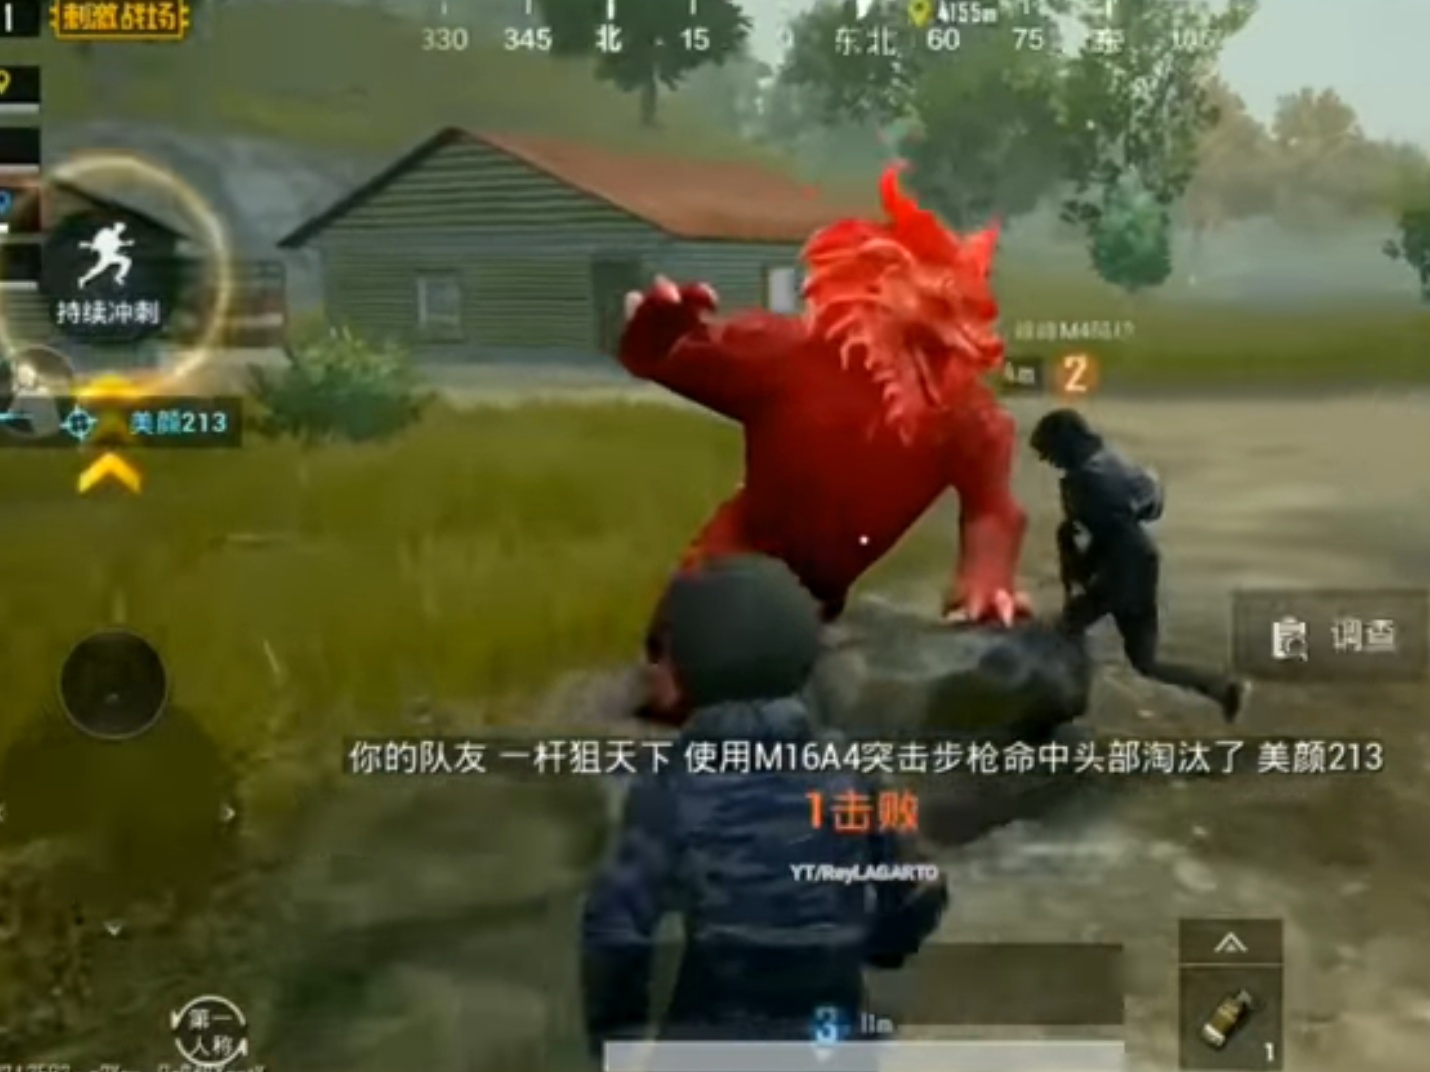 Pubg Mobile New Update Chinese | Pubg Free Gift - 